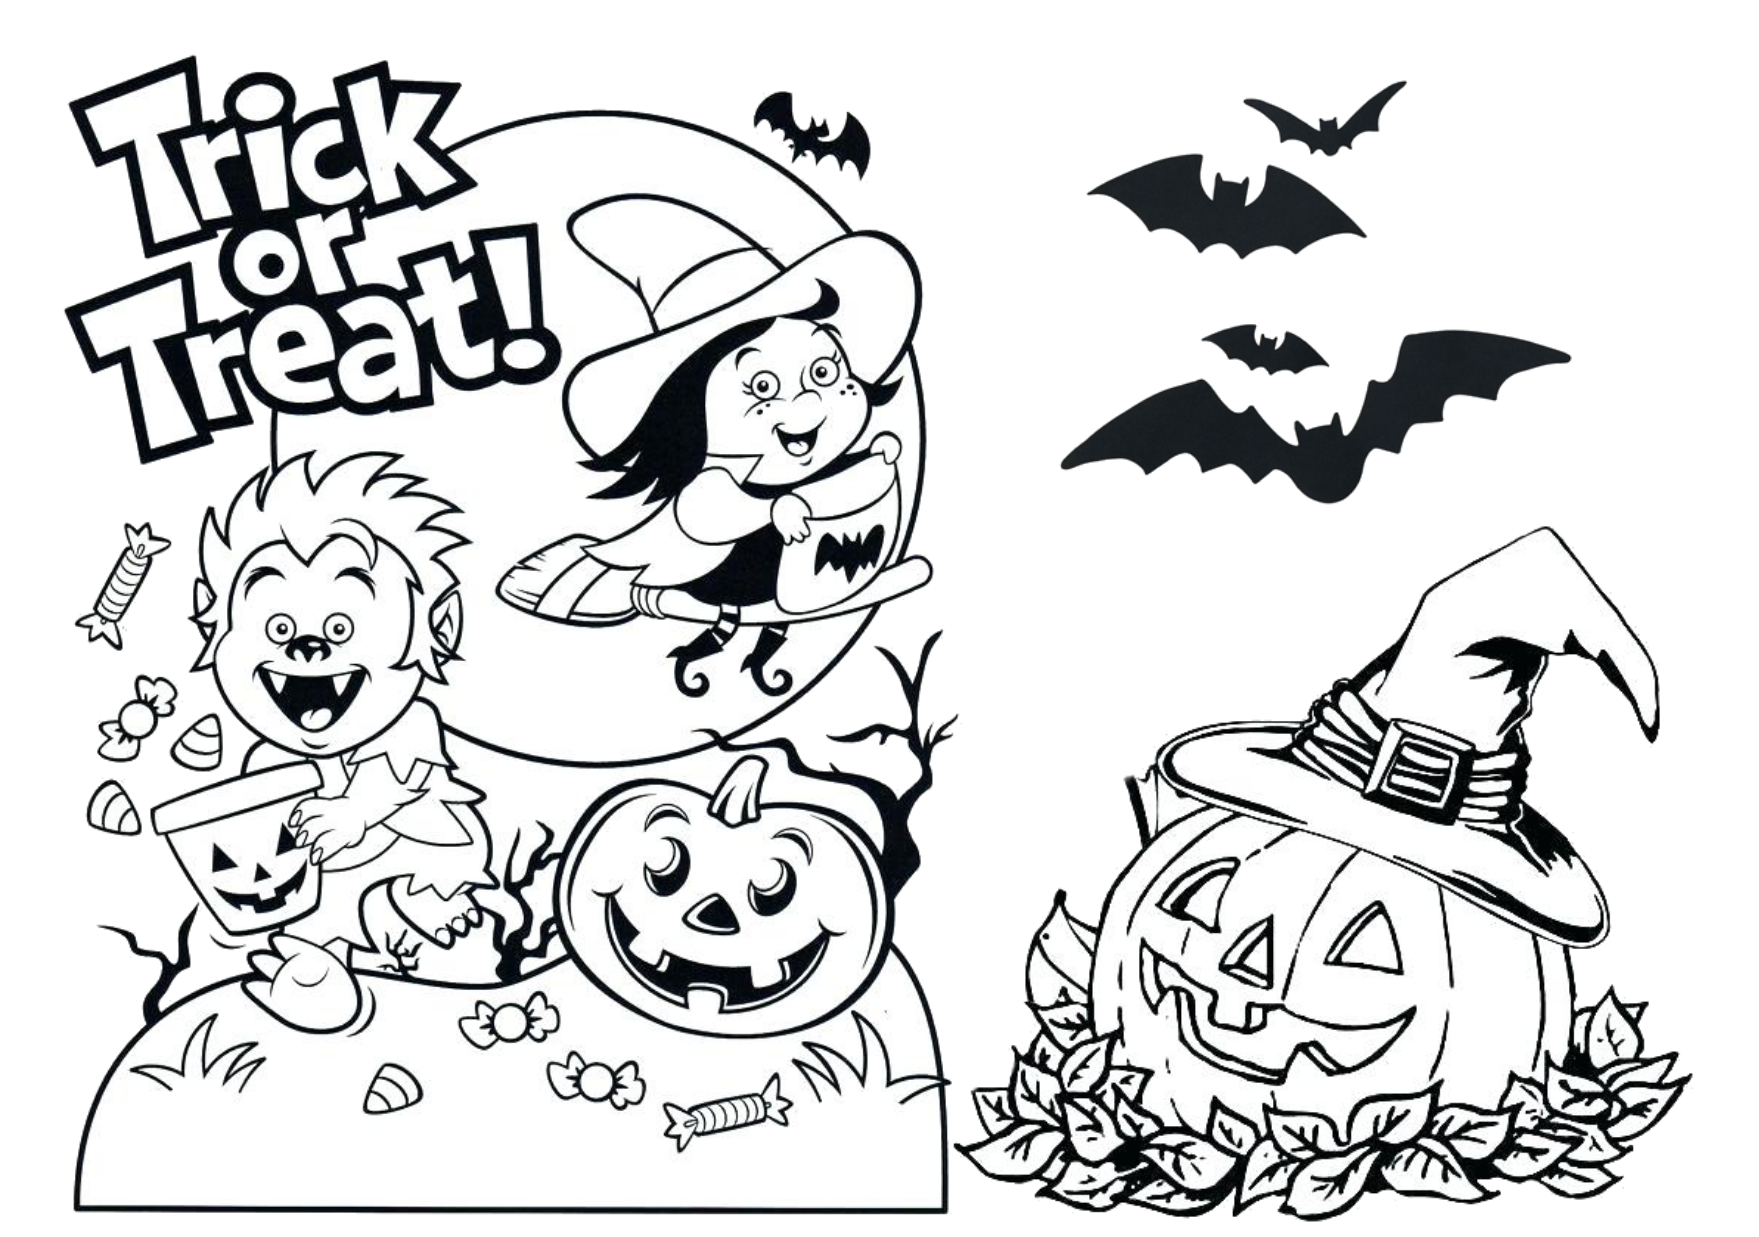 Trick or treat free printable coloring pages.